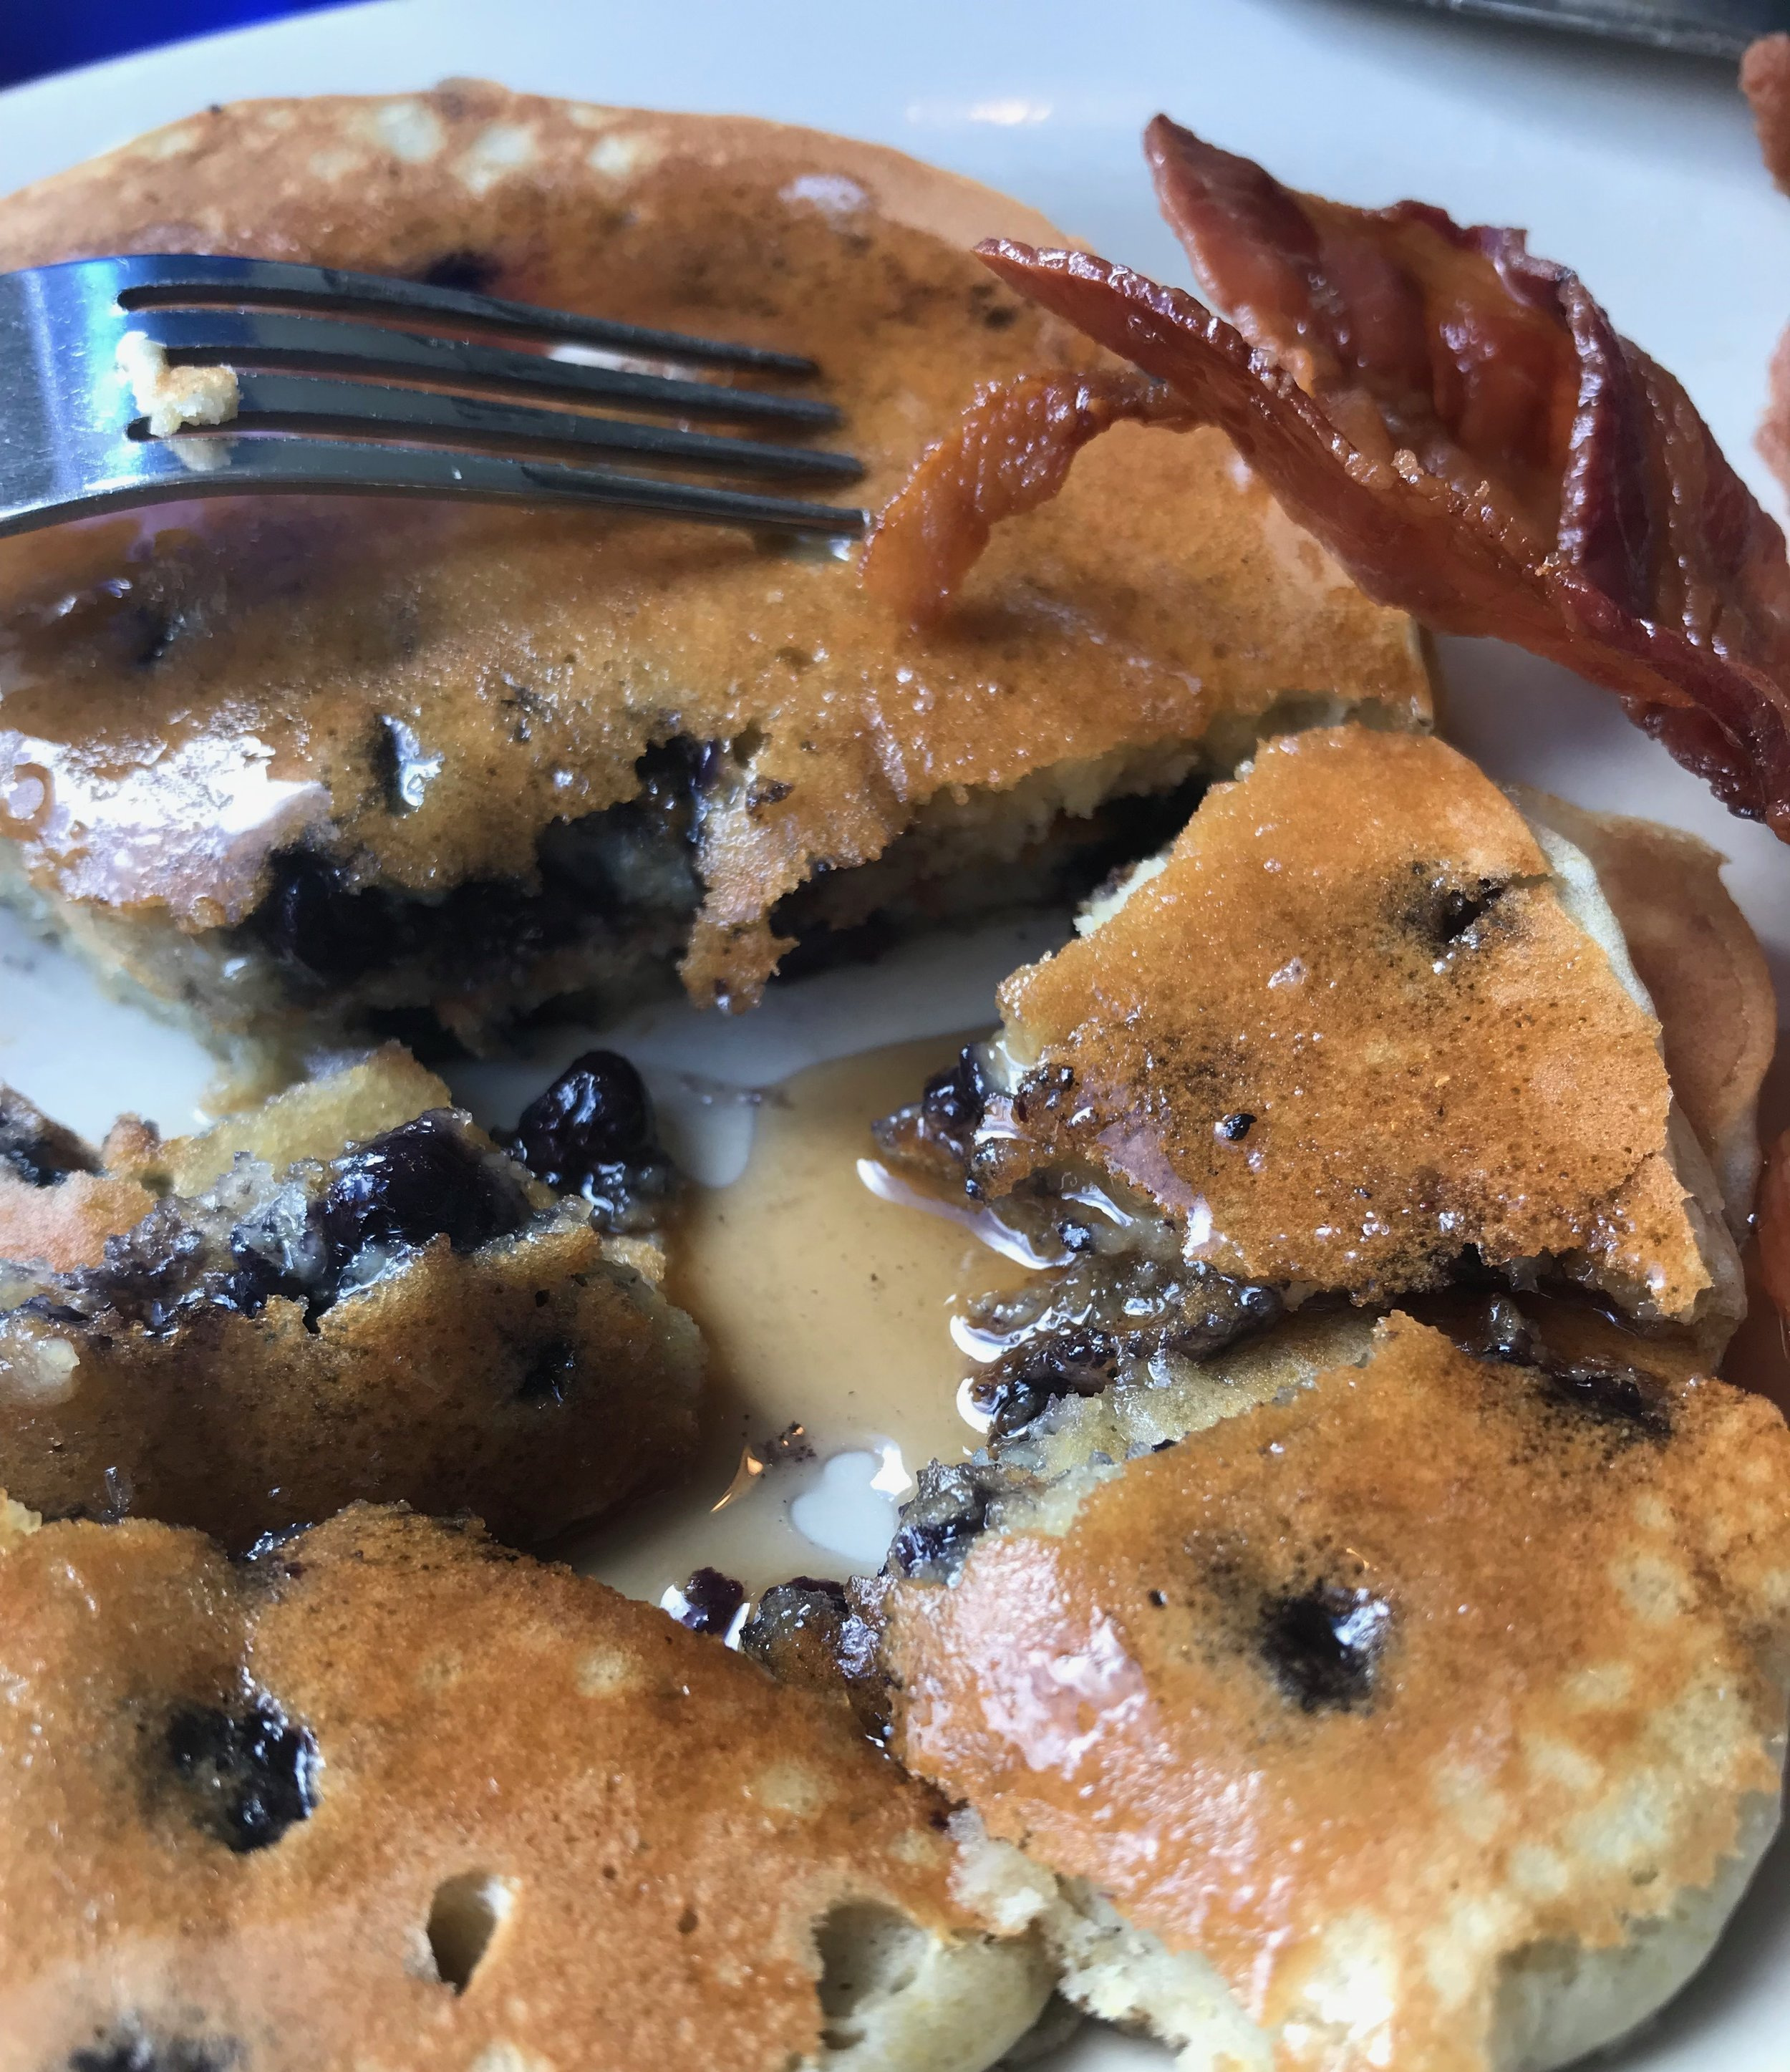  Things to do in Southern Maine - Eat blueberry pancakes 